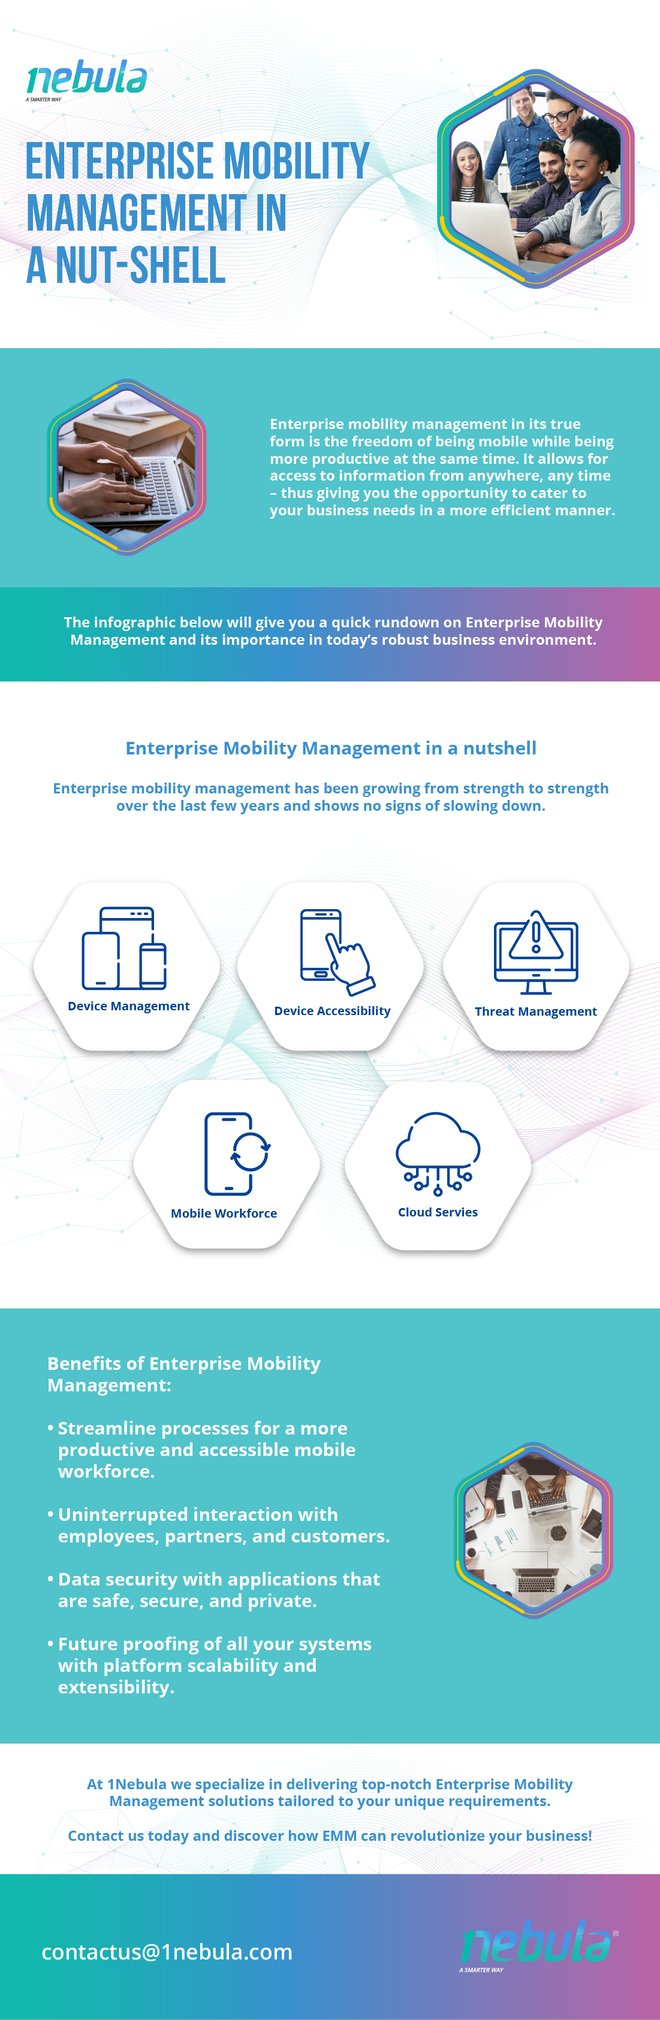 Infographic_Enterprise Mobility Management in a nut-shell-01